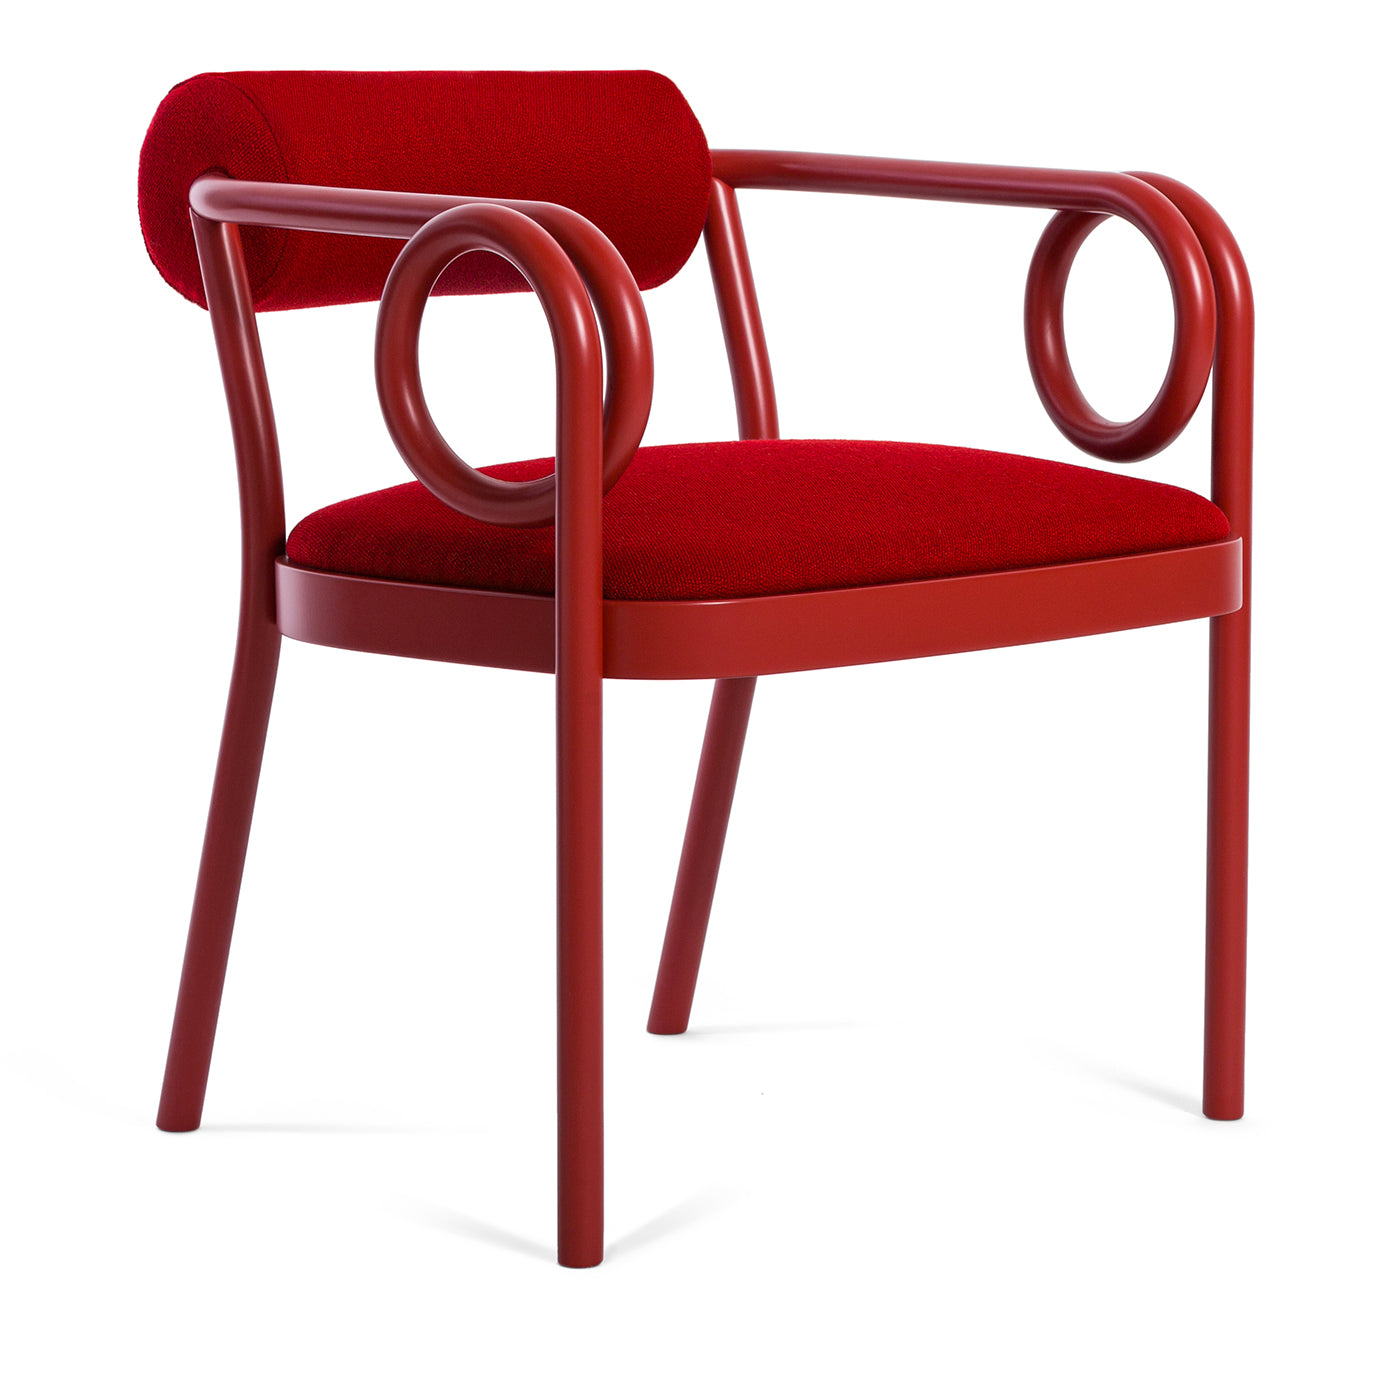 Loop Red Lounge Chair by India Mahdavi - Alternative view 2